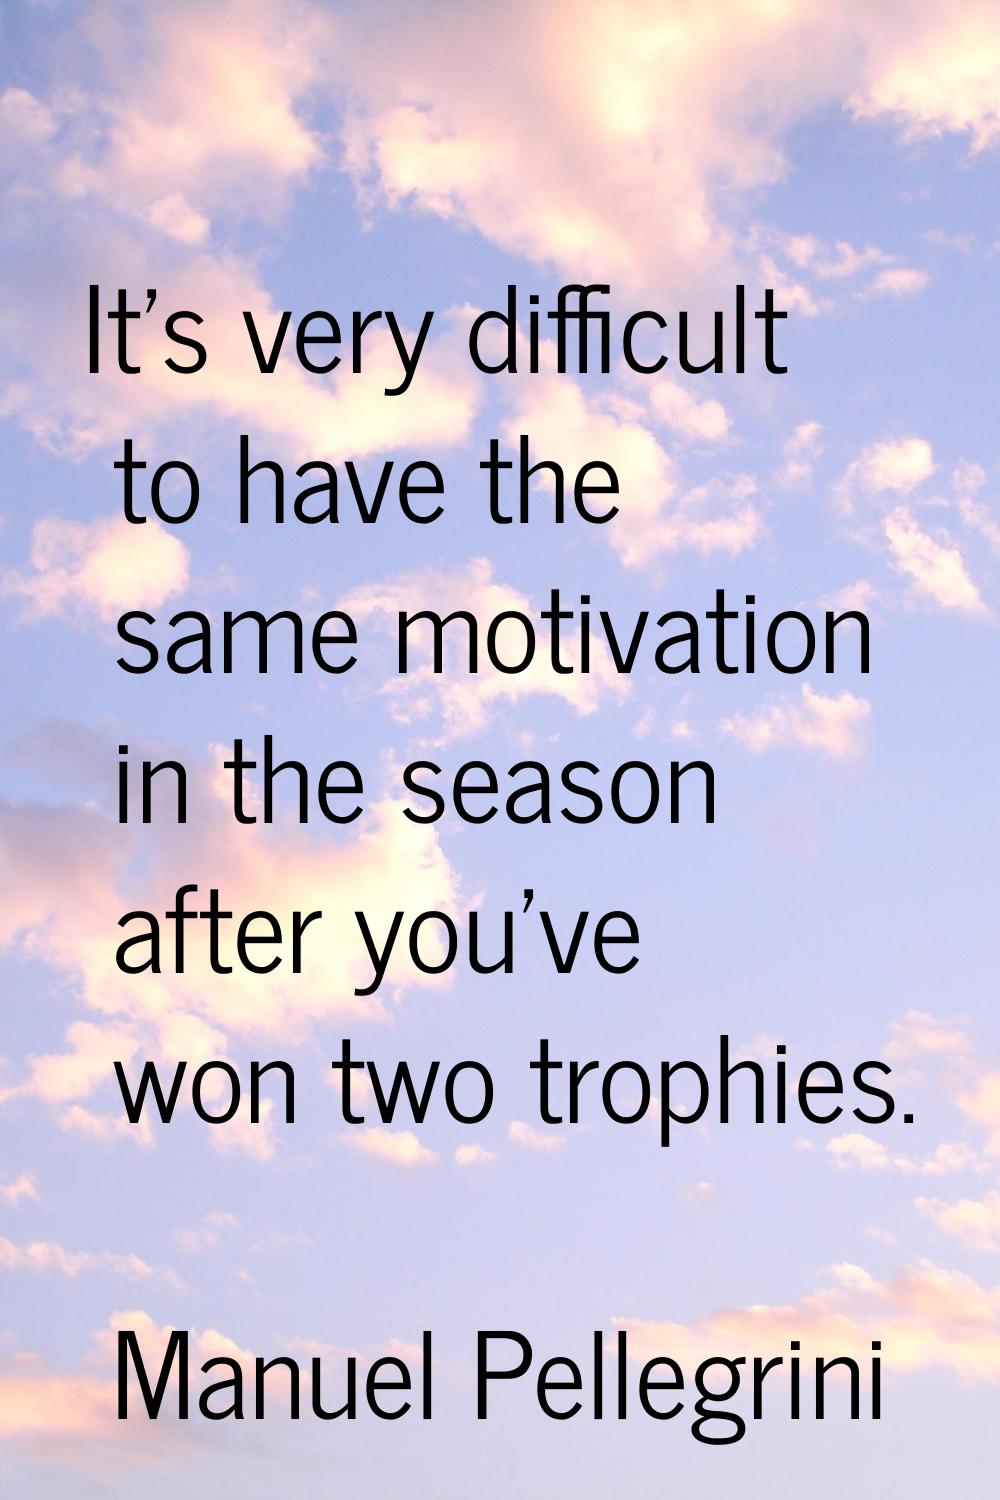 It's very difficult to have the same motivation in the season after you've won two trophies.